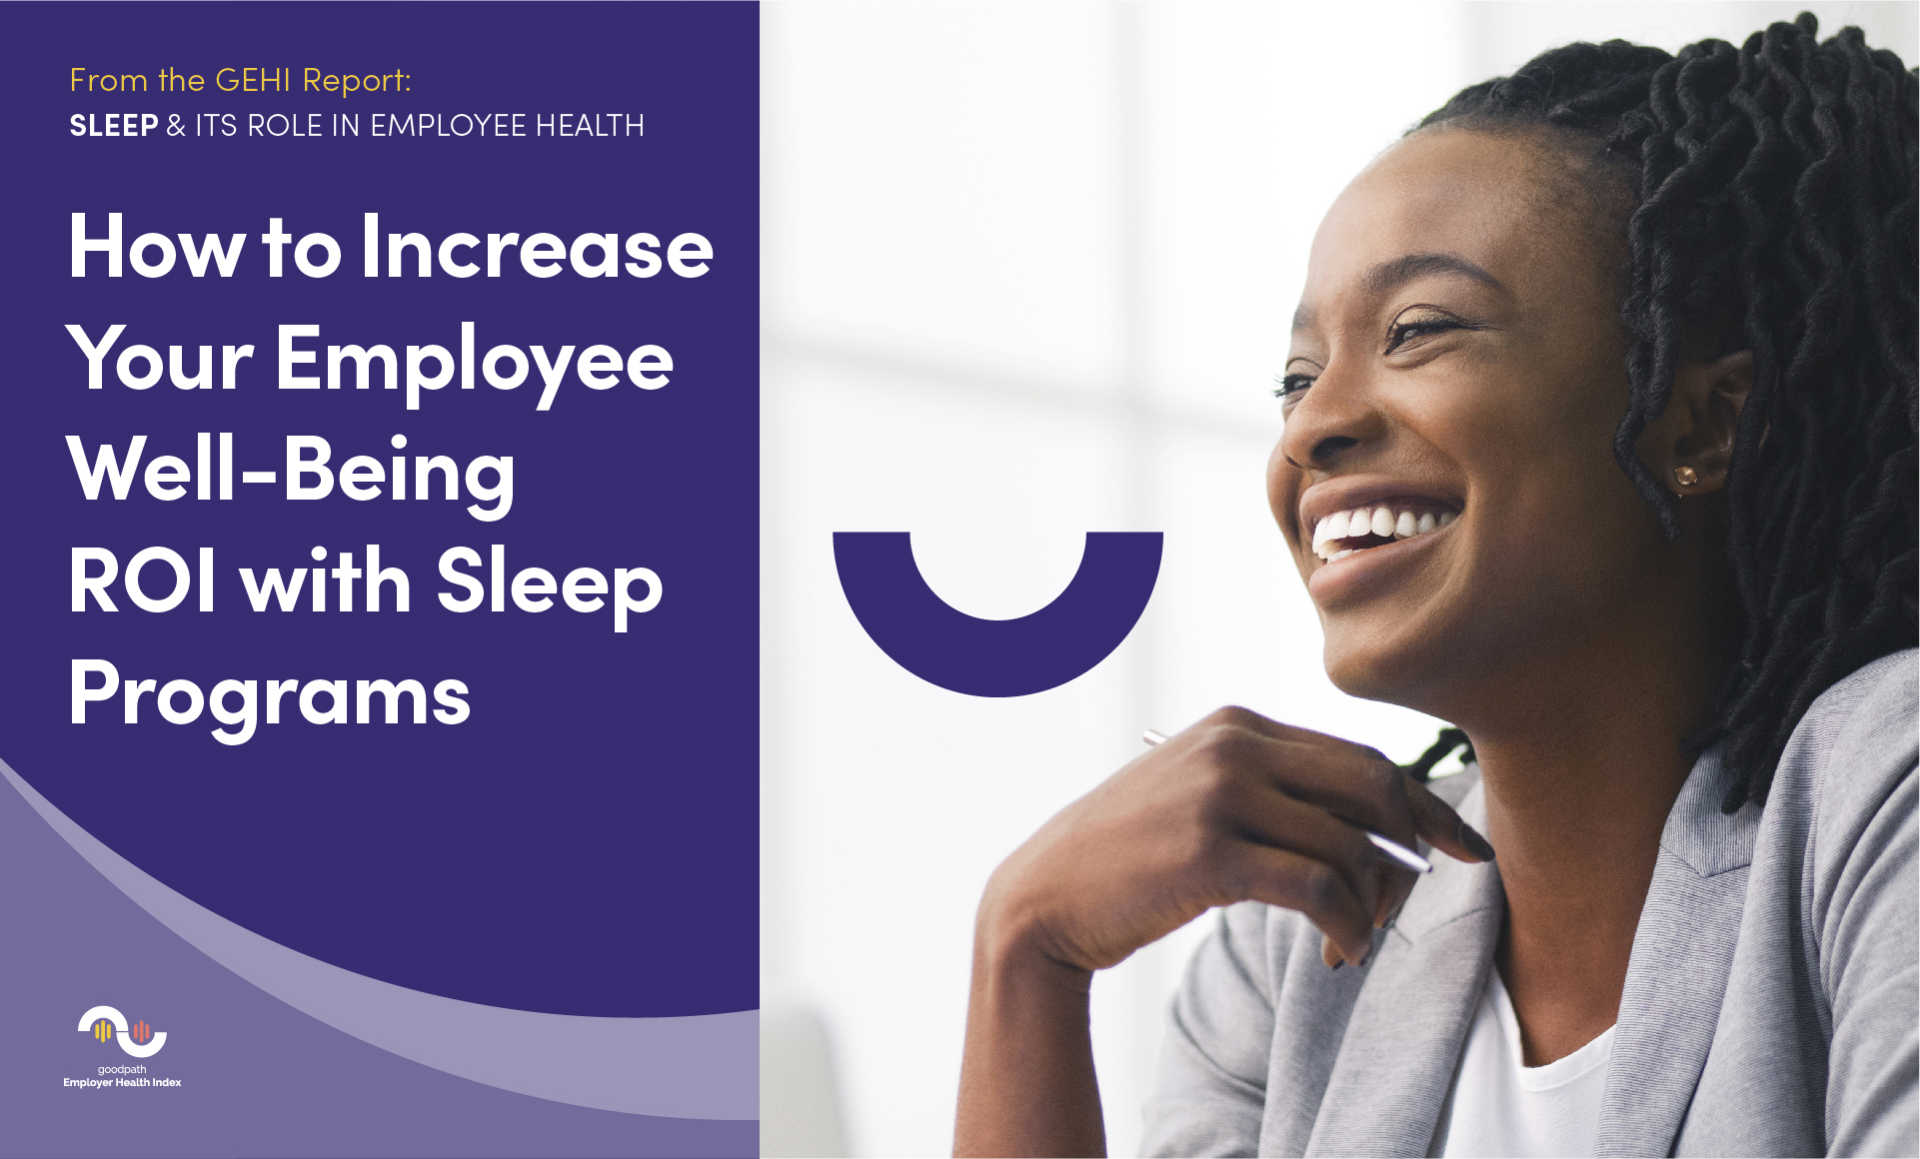 How to Increase Your Employee Well-Being ROI with Sleep Programs